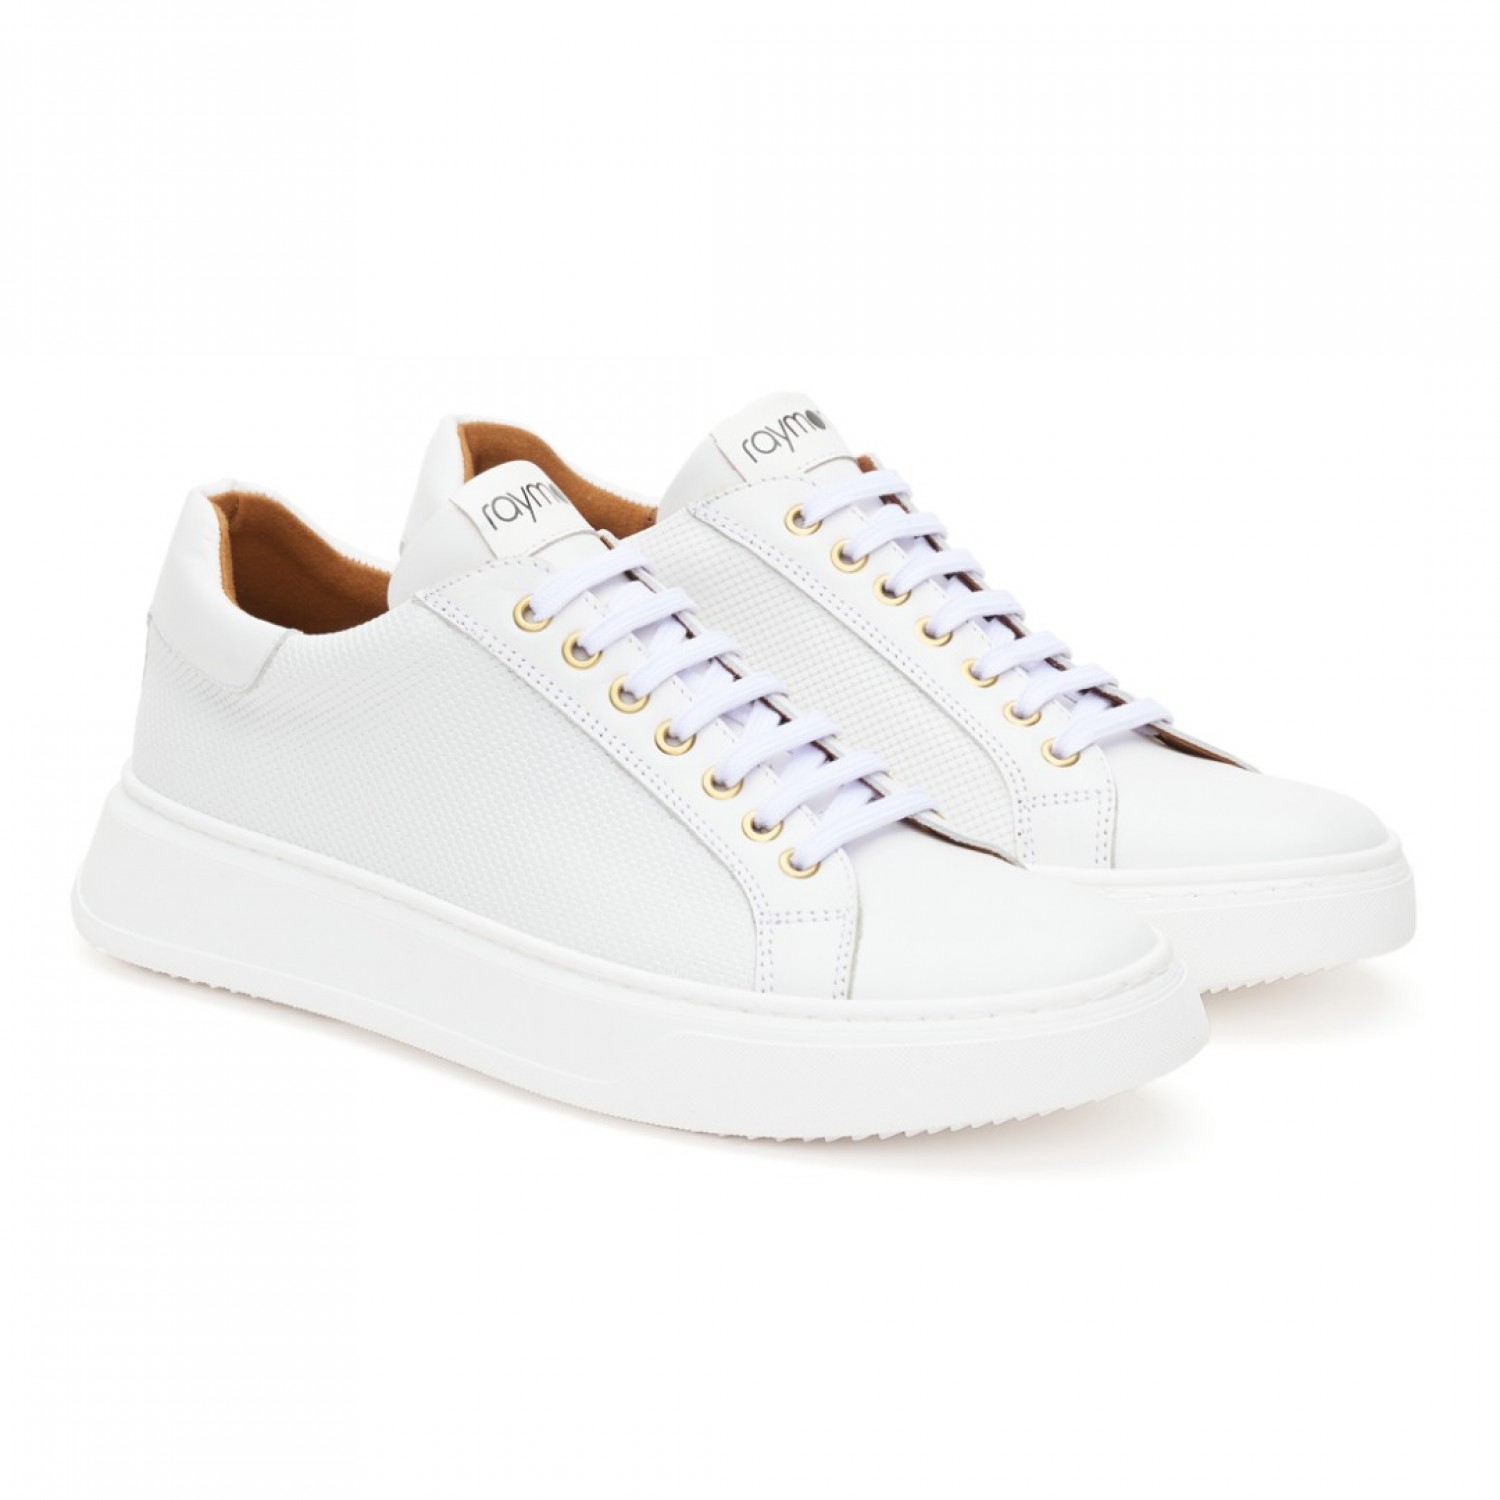 MAXIM LEATHER LOW TOP SNEAKERS